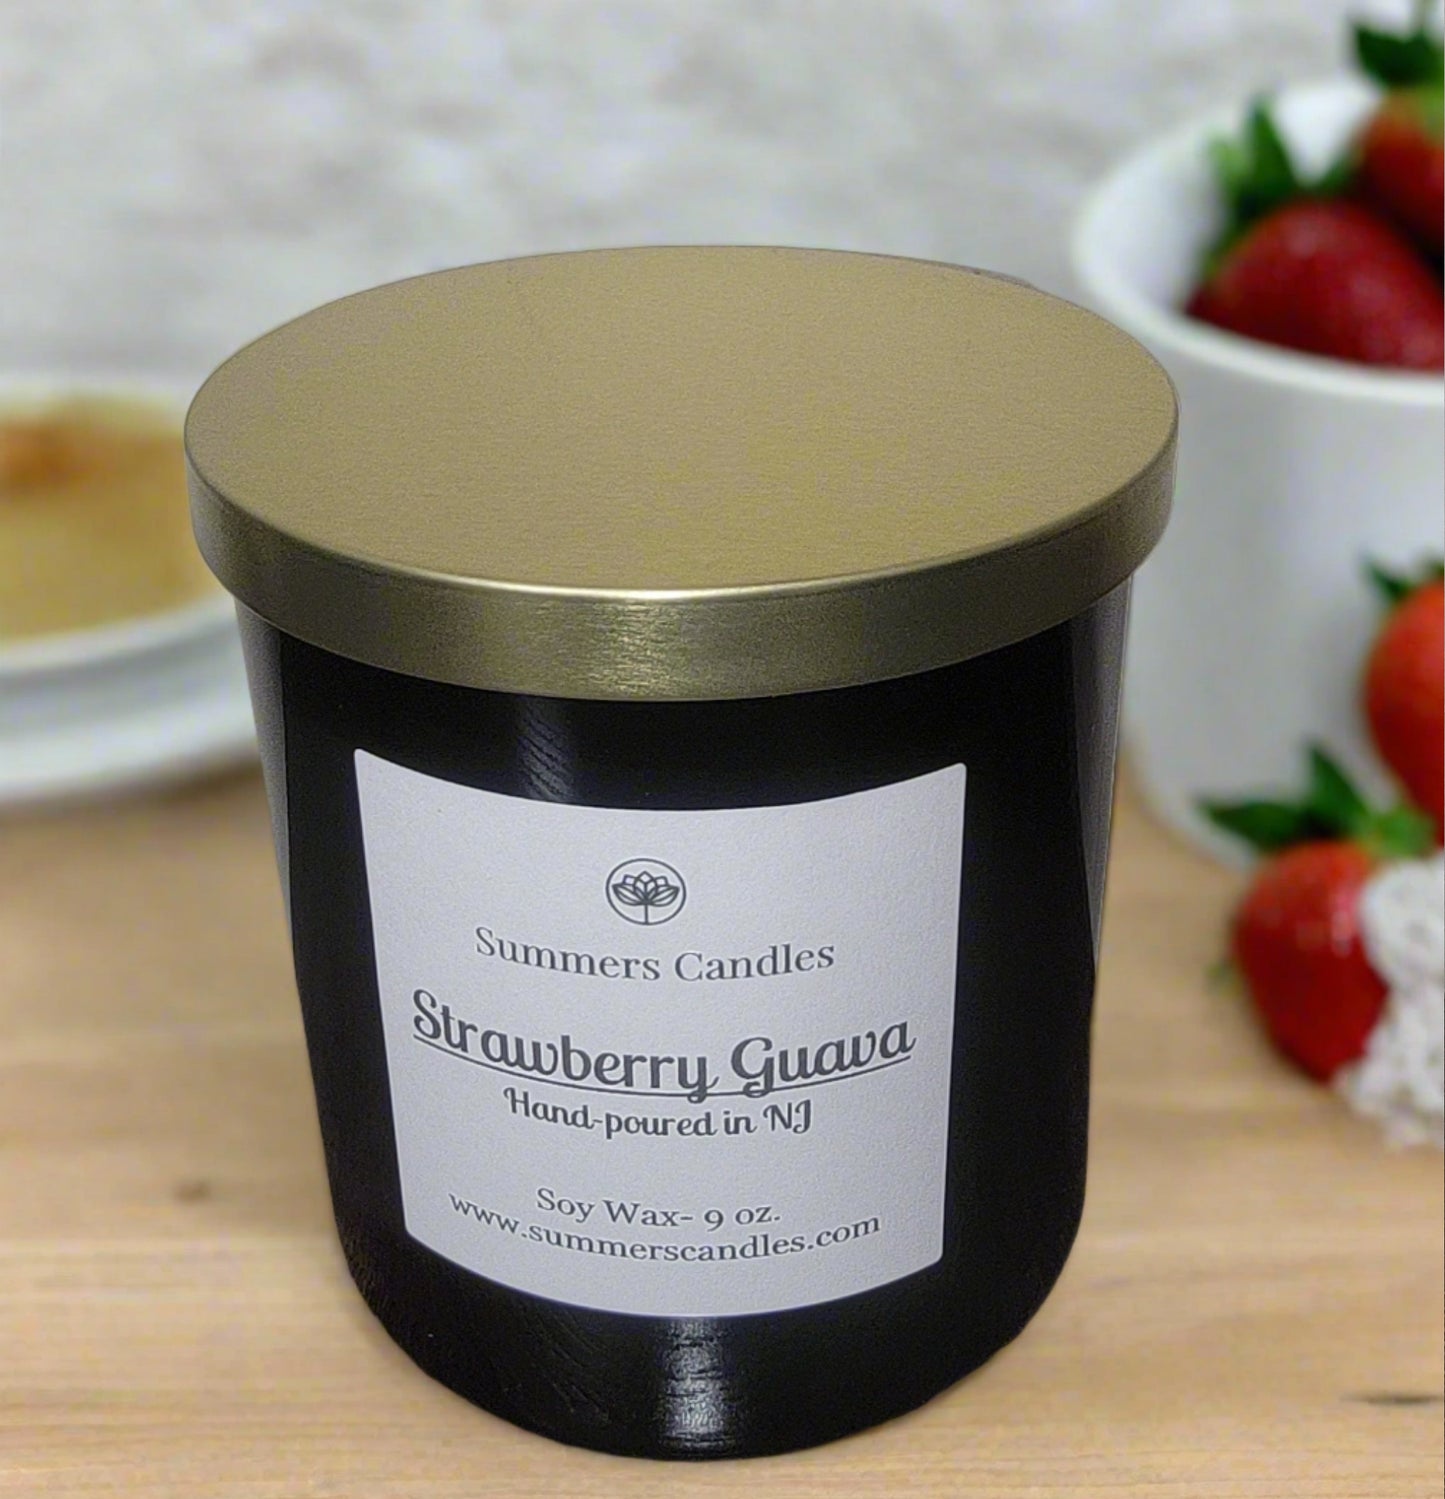 Strawberry Guava- Summers Candles